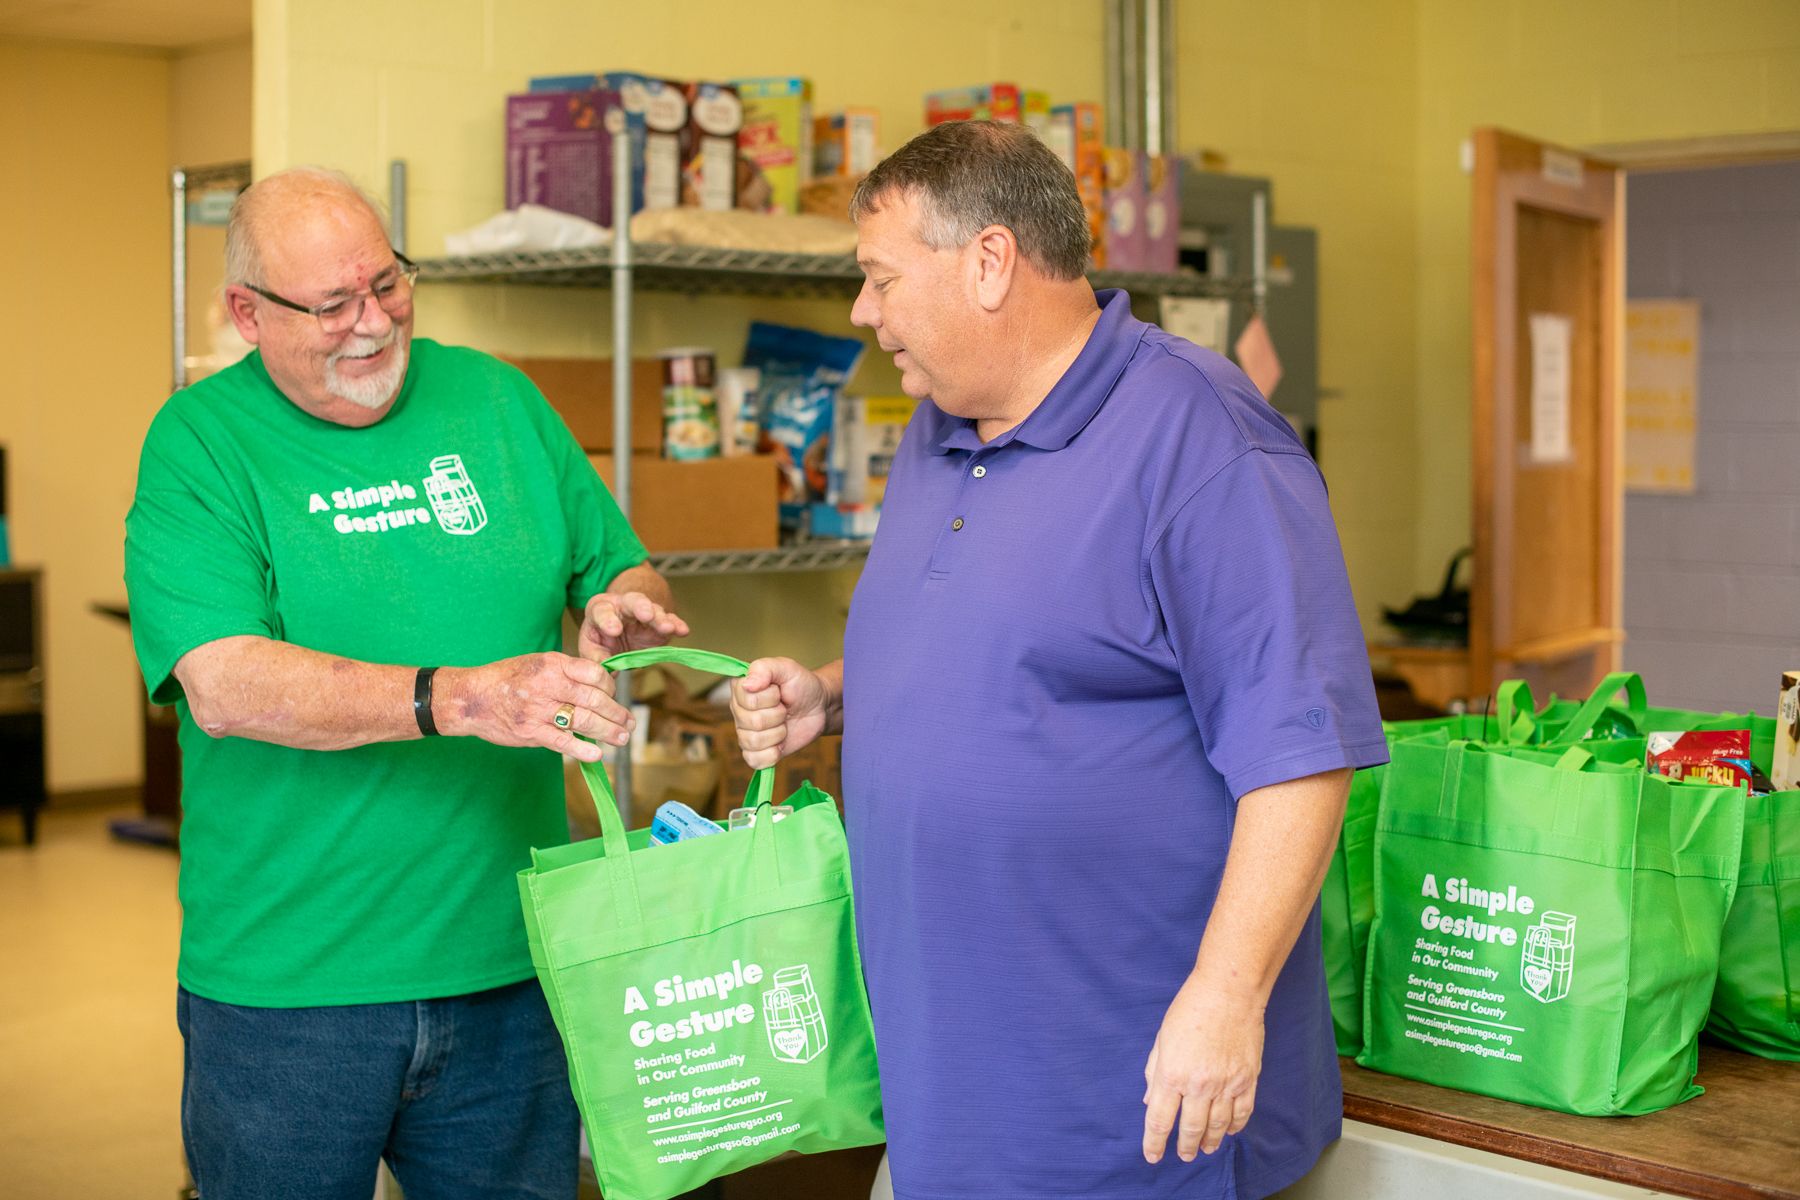 David Lees hands a grocery bag of food to Brad Bowers, Executive Director at A Simple Gesture.